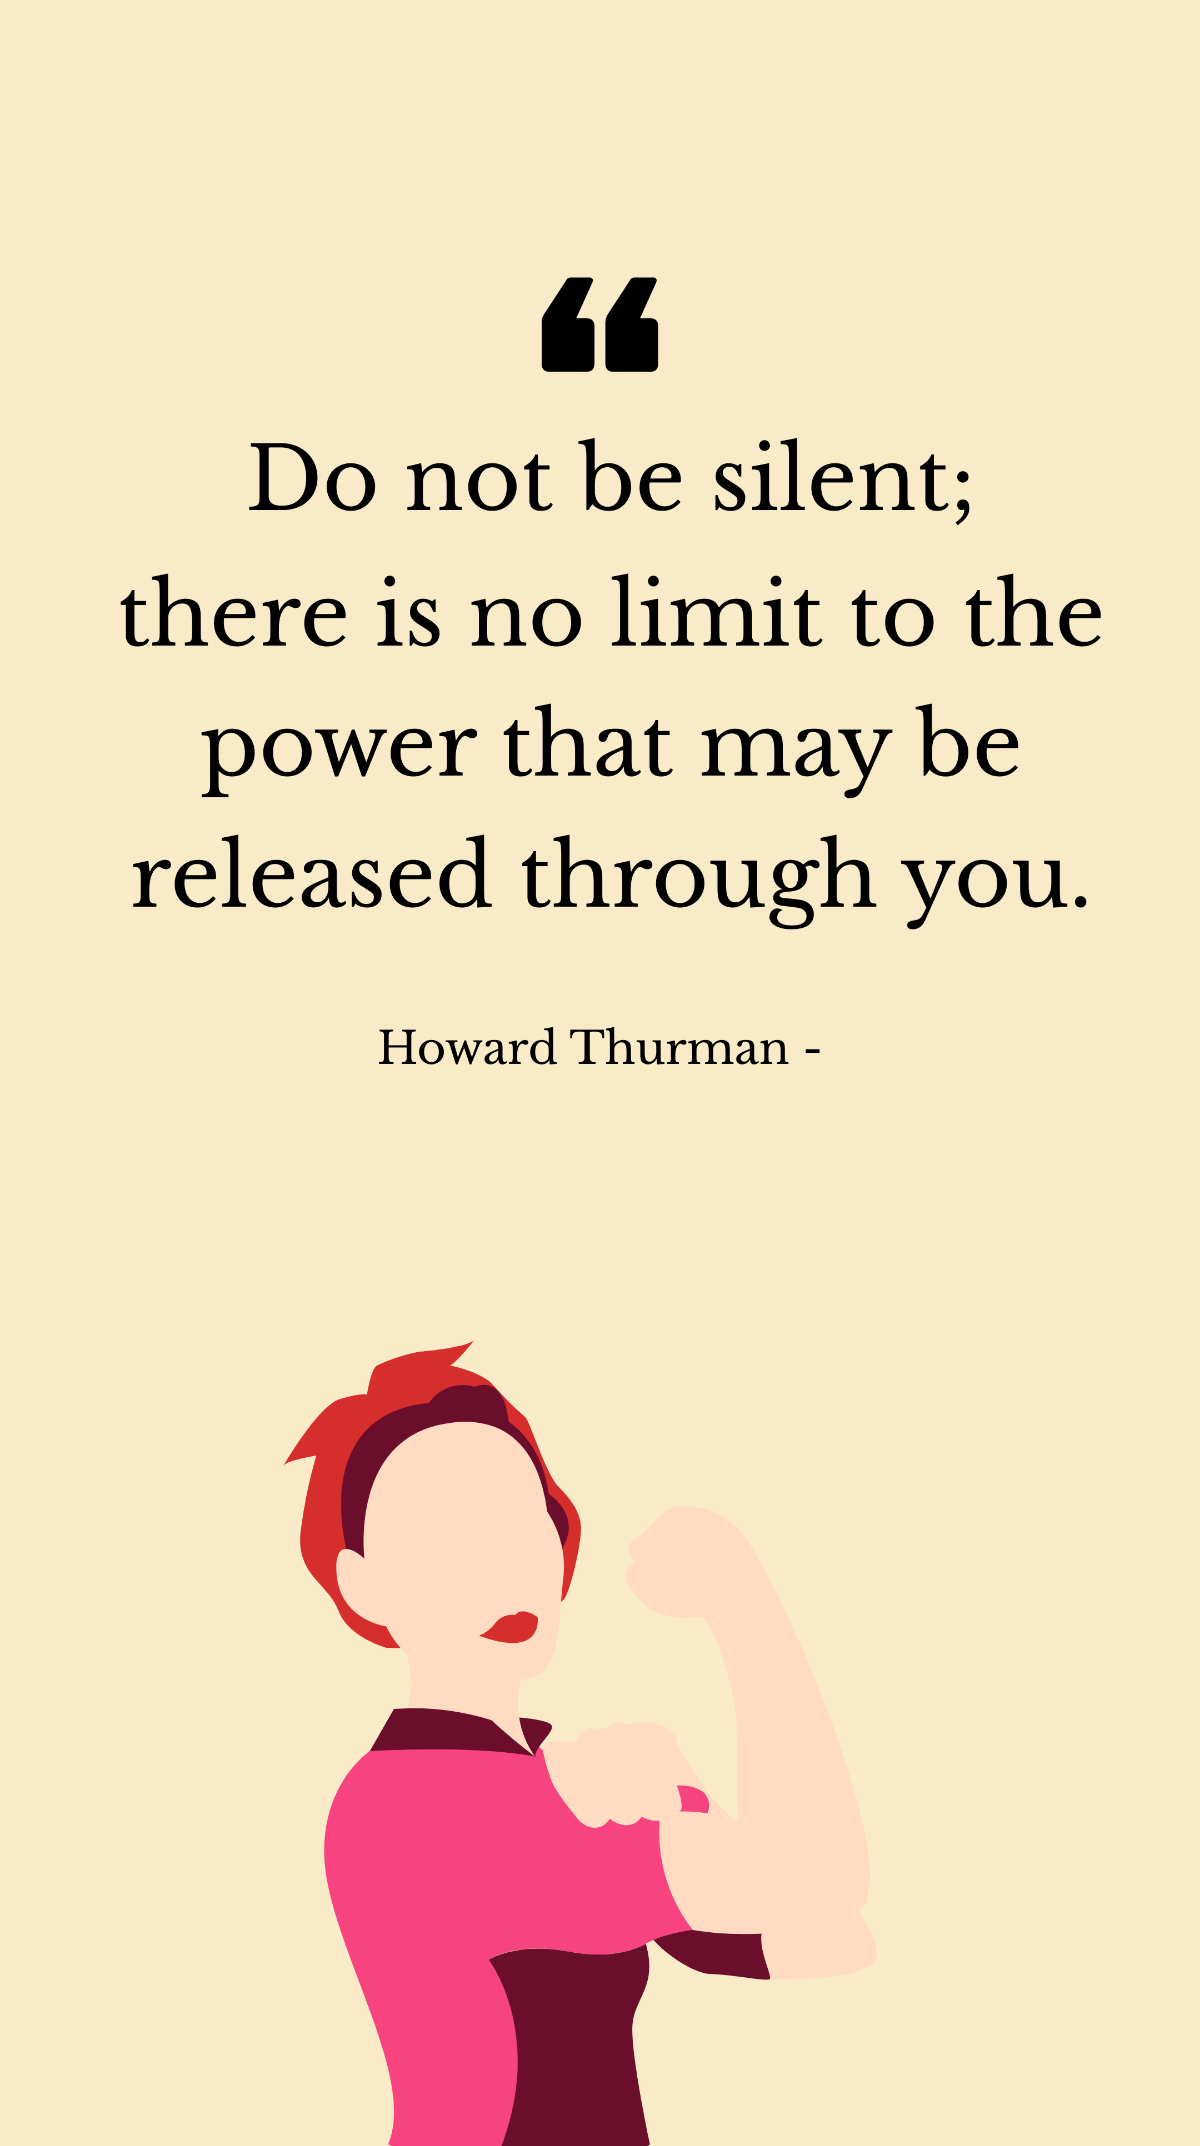 Howard Thurman - Do not be silent; there is no limit to the power that may be released through you. Template